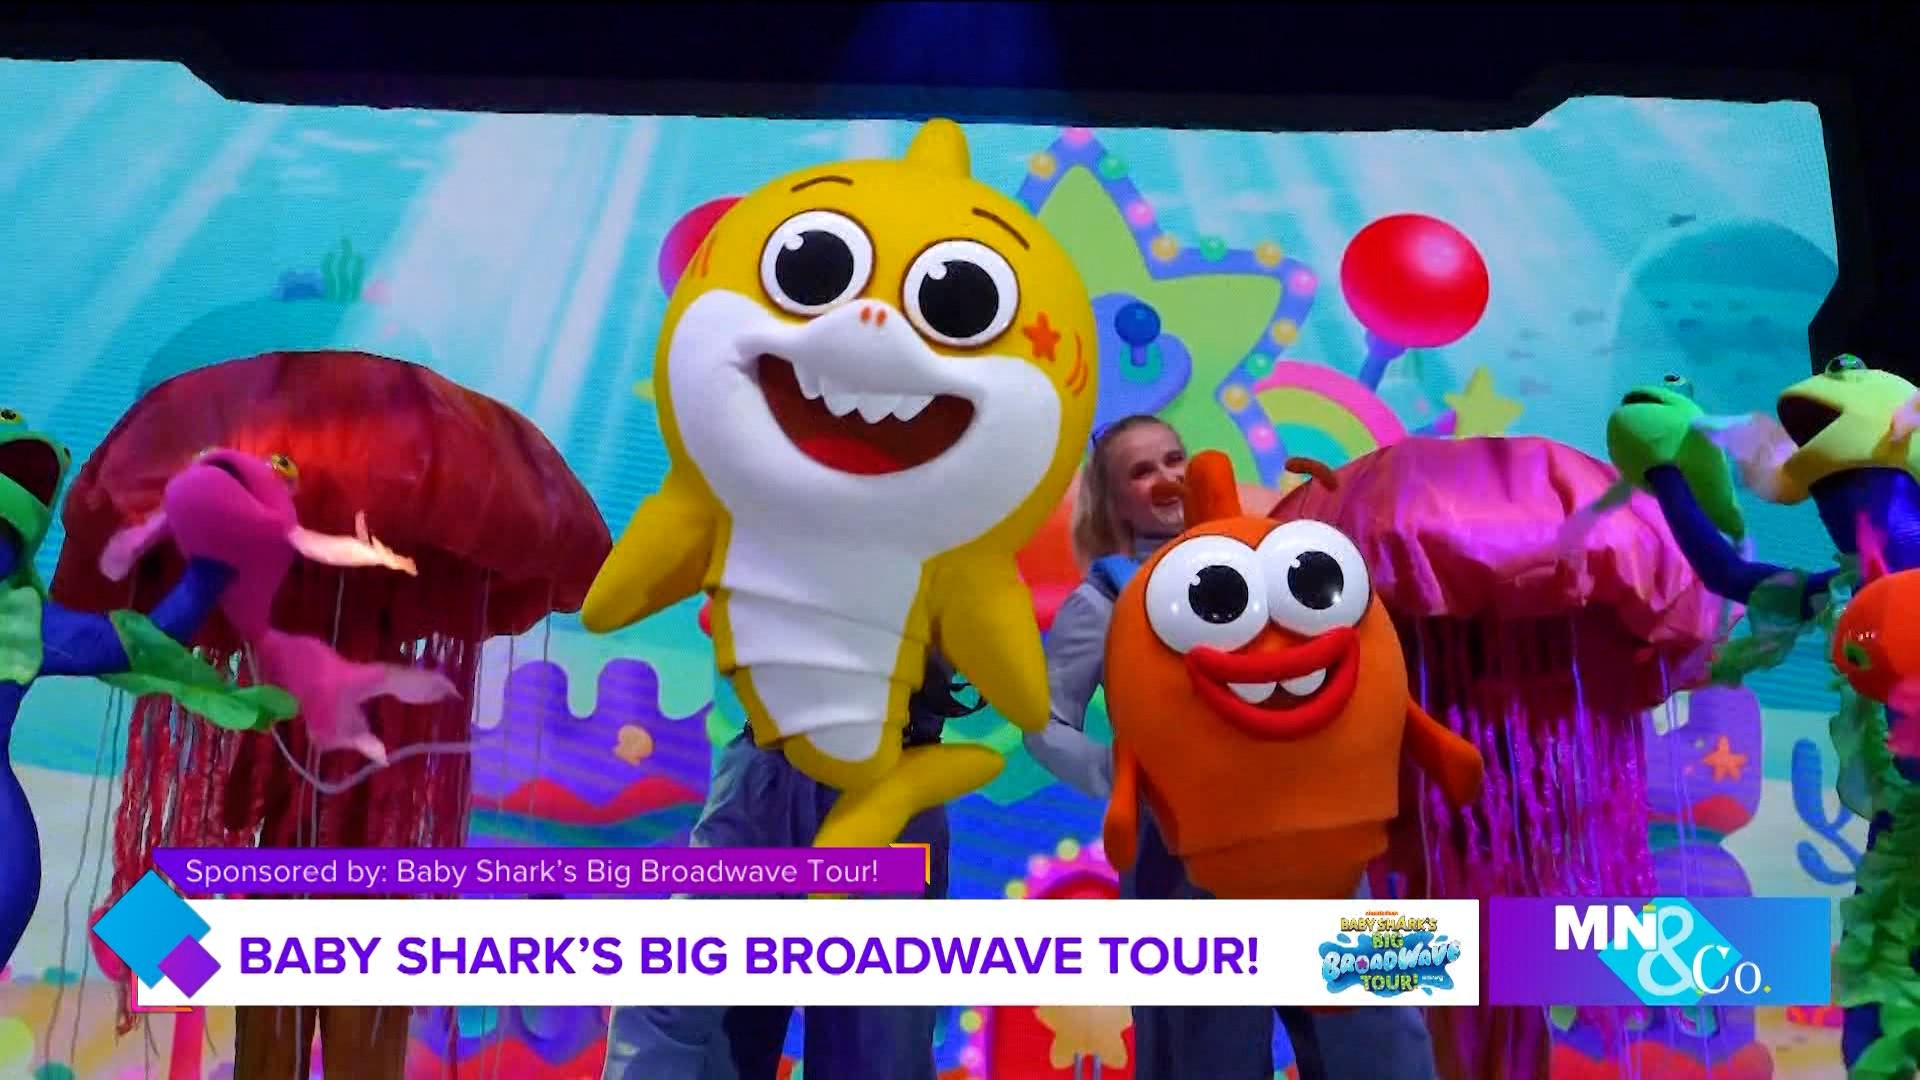 Baby Shark’s Big Broadwave Tour! joins Minnesota & Company to discuss the live show, packed with catchy music, endearing characters and unique experiences.